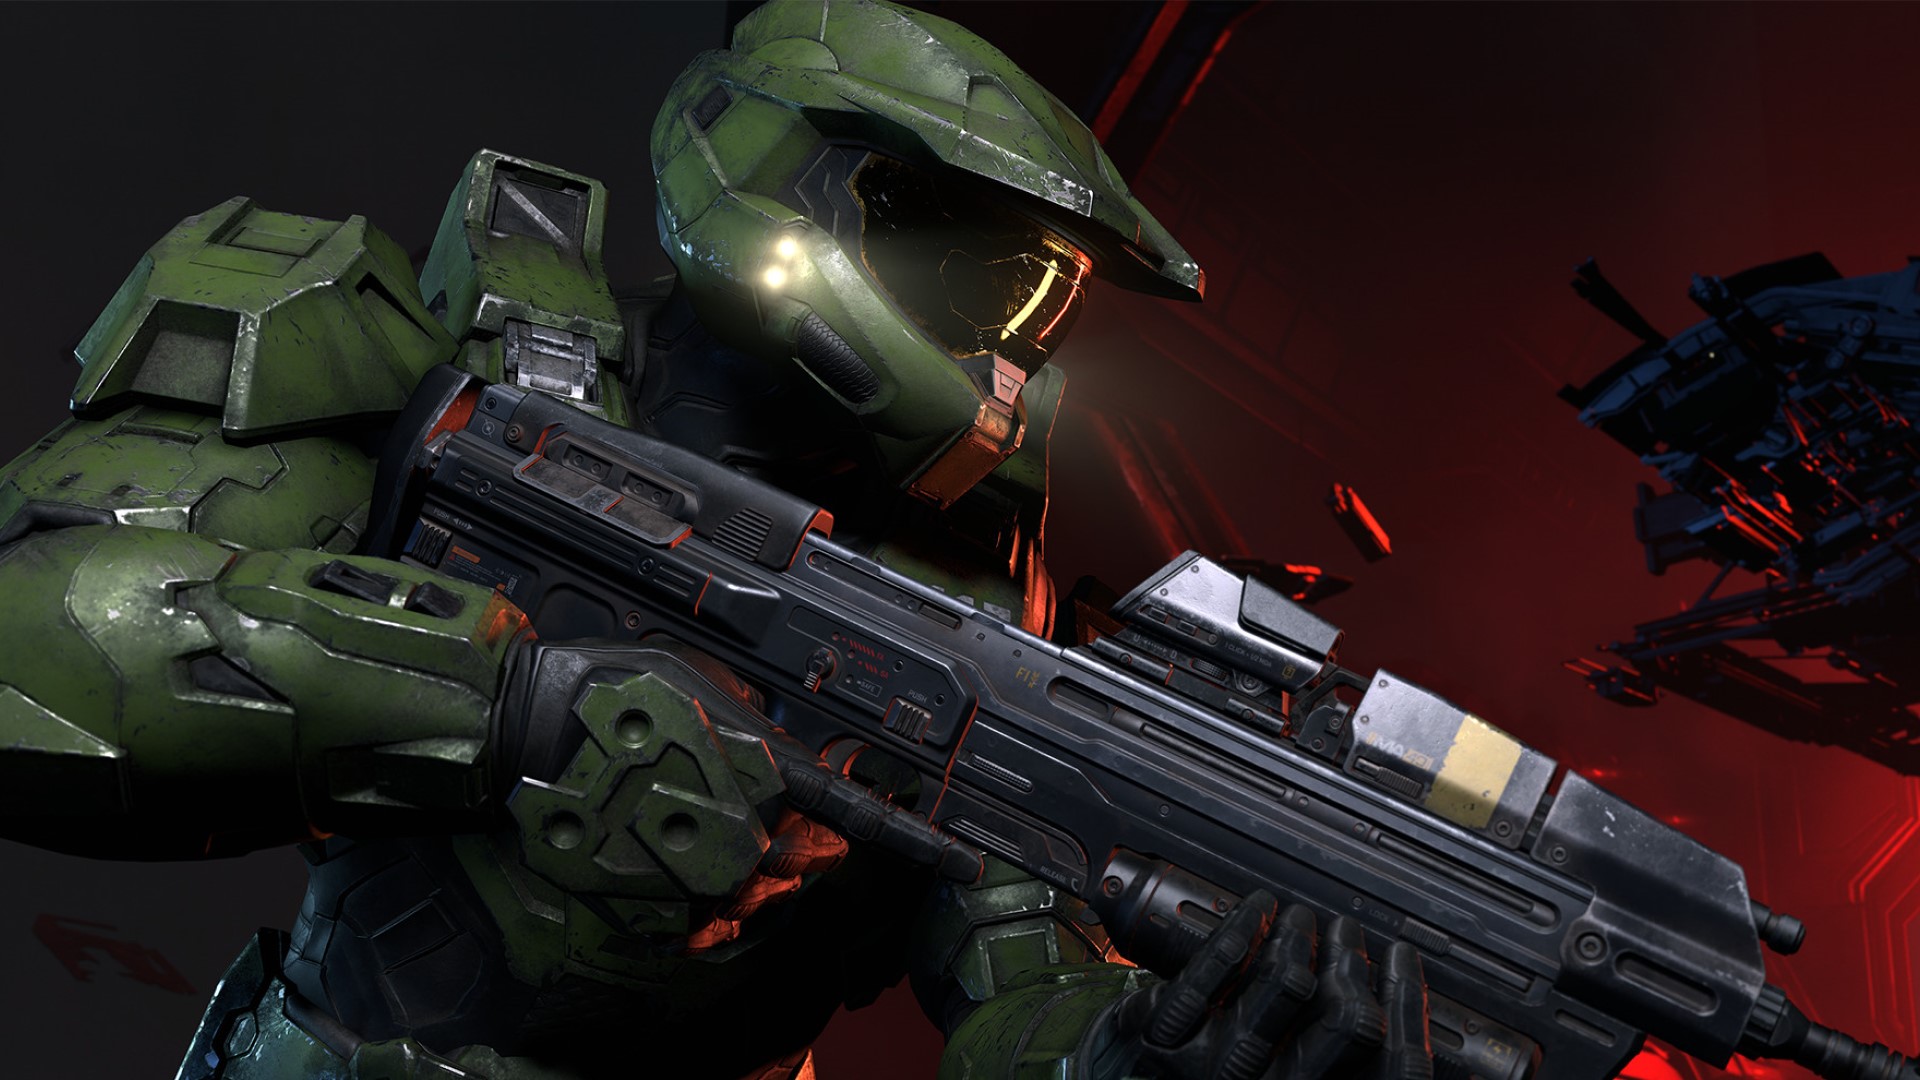 Halo Was Absent at the Xbox Showcase Because “We Have a Lot More Games Now” – Phil Spencer